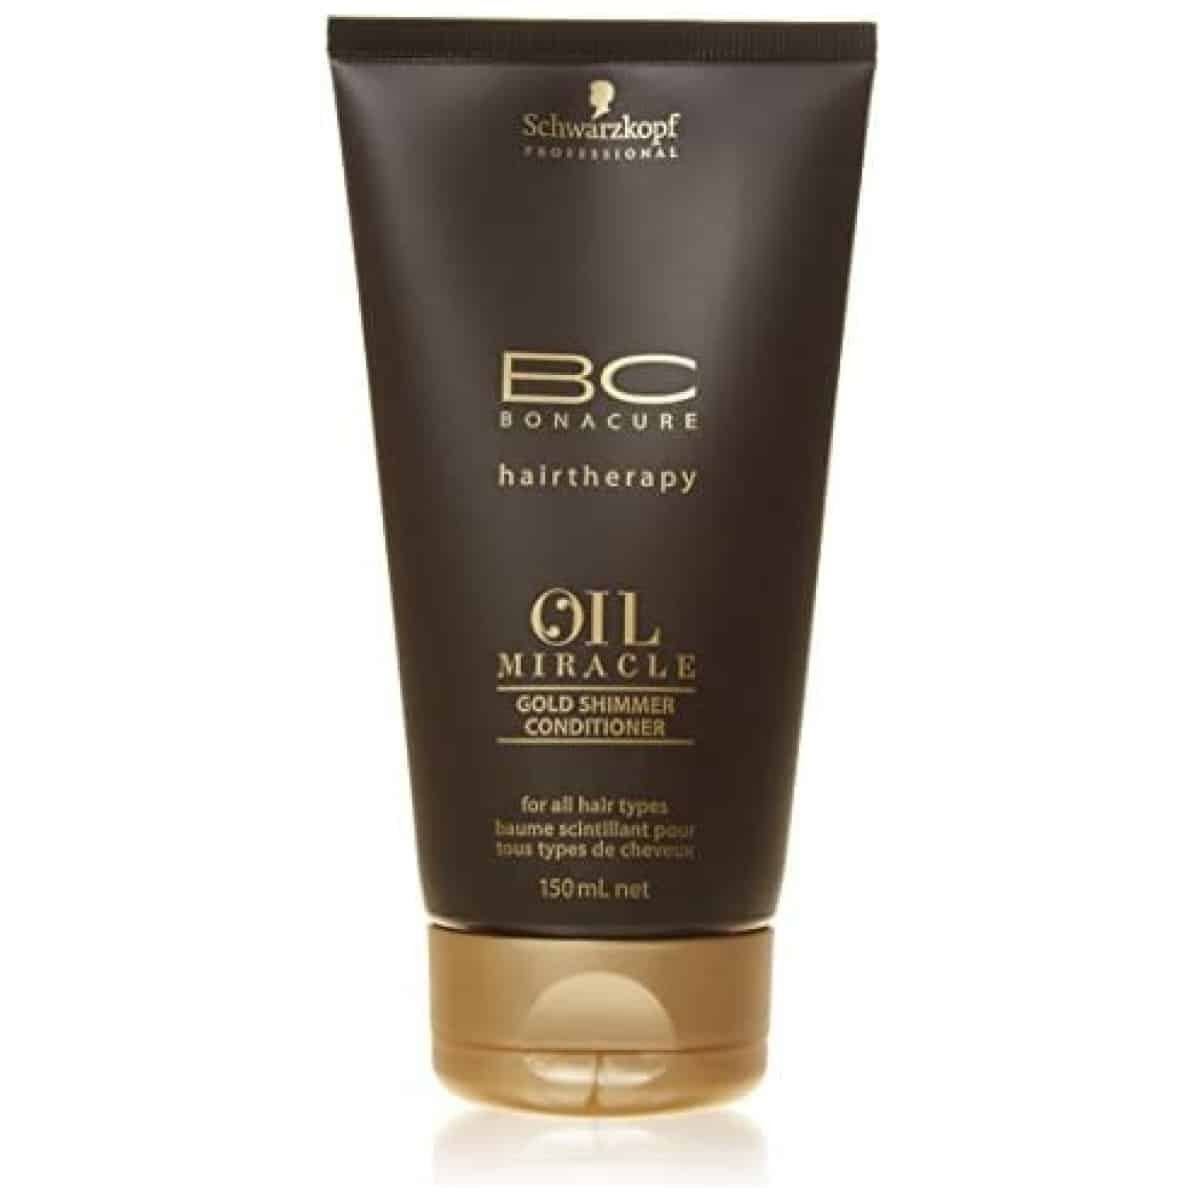 Schwarzkopf Bc Oil Miracle Gold Shimmer Conditioner 150ml